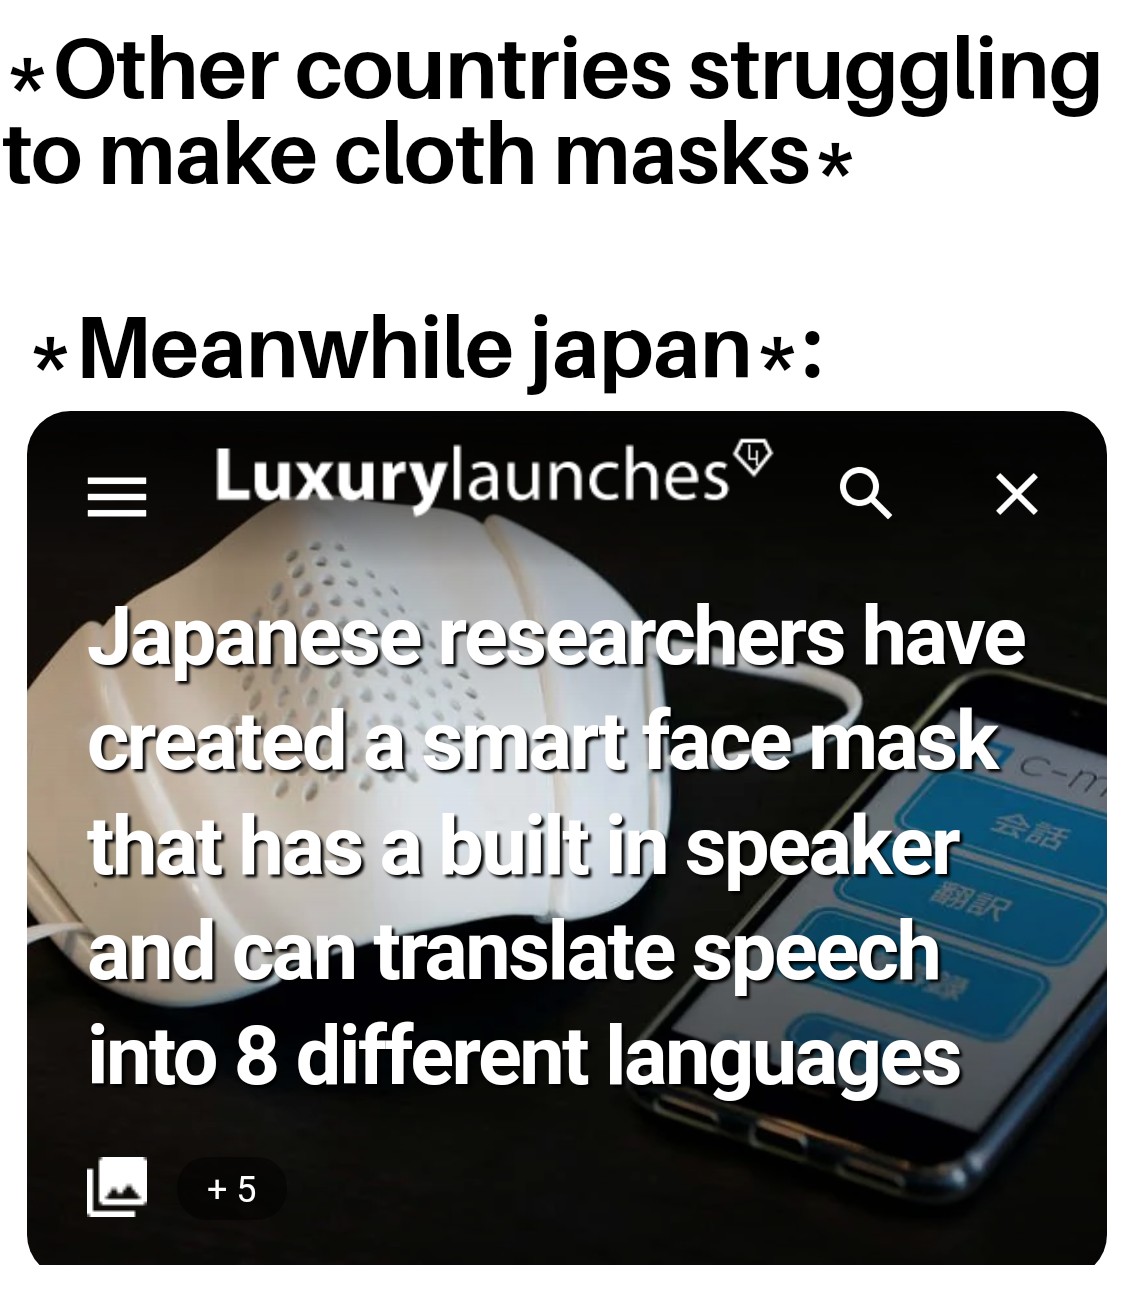 Funny, China, America, Japanese, Darth Vader, Bane other memes Funny, China, America, Japanese, Darth Vader, Bane text: *Other countries struggling to make cloth masks* *Meanwhile japan*'. Luxurylaunches0 Q x apanese resea cher.have cediase created }Ej3